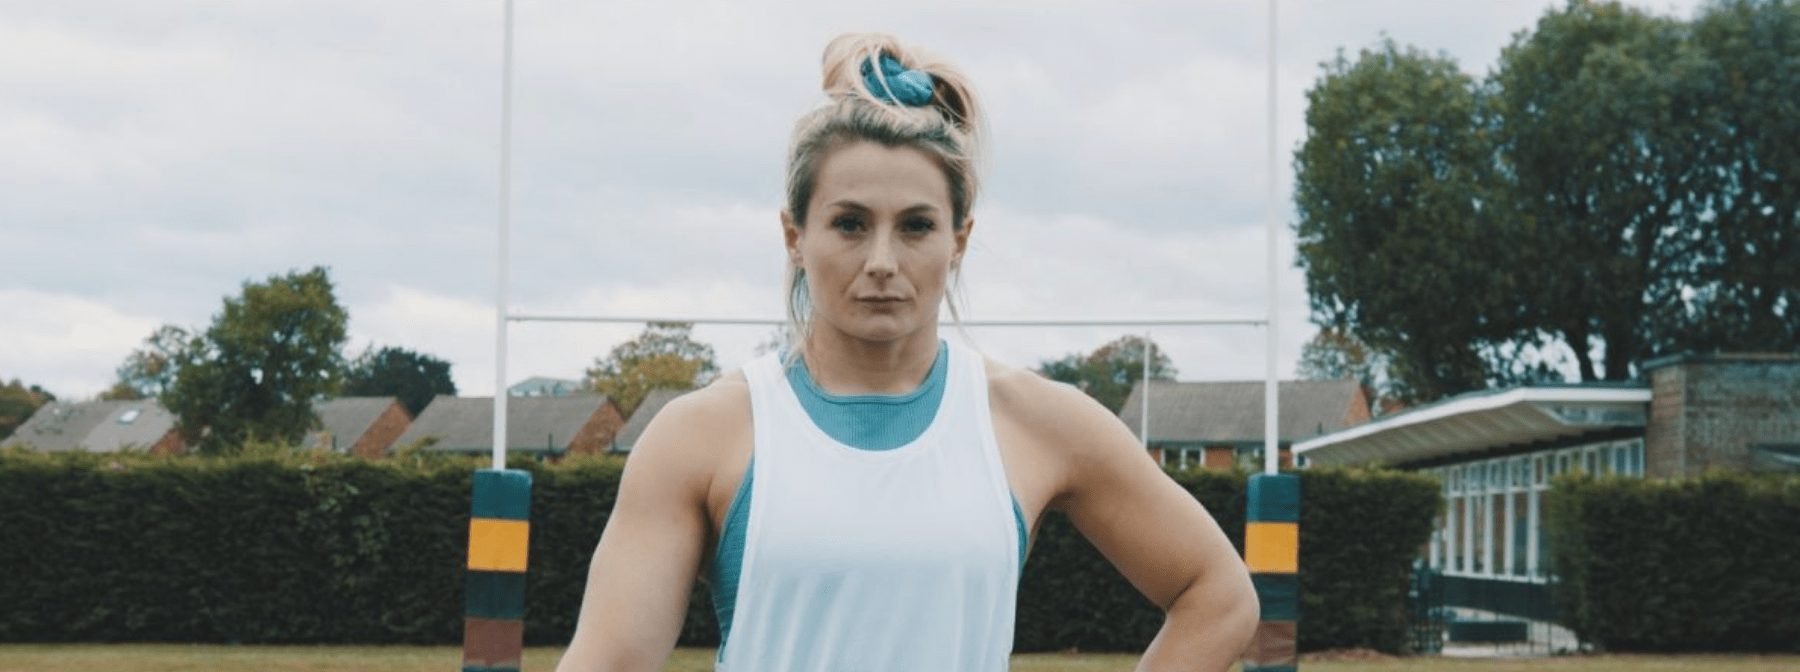 Why Aren’t  Mental Struggles Treated Like Physical Injuries? | Vicky Fleetwood: The Locker Room – Episode 3